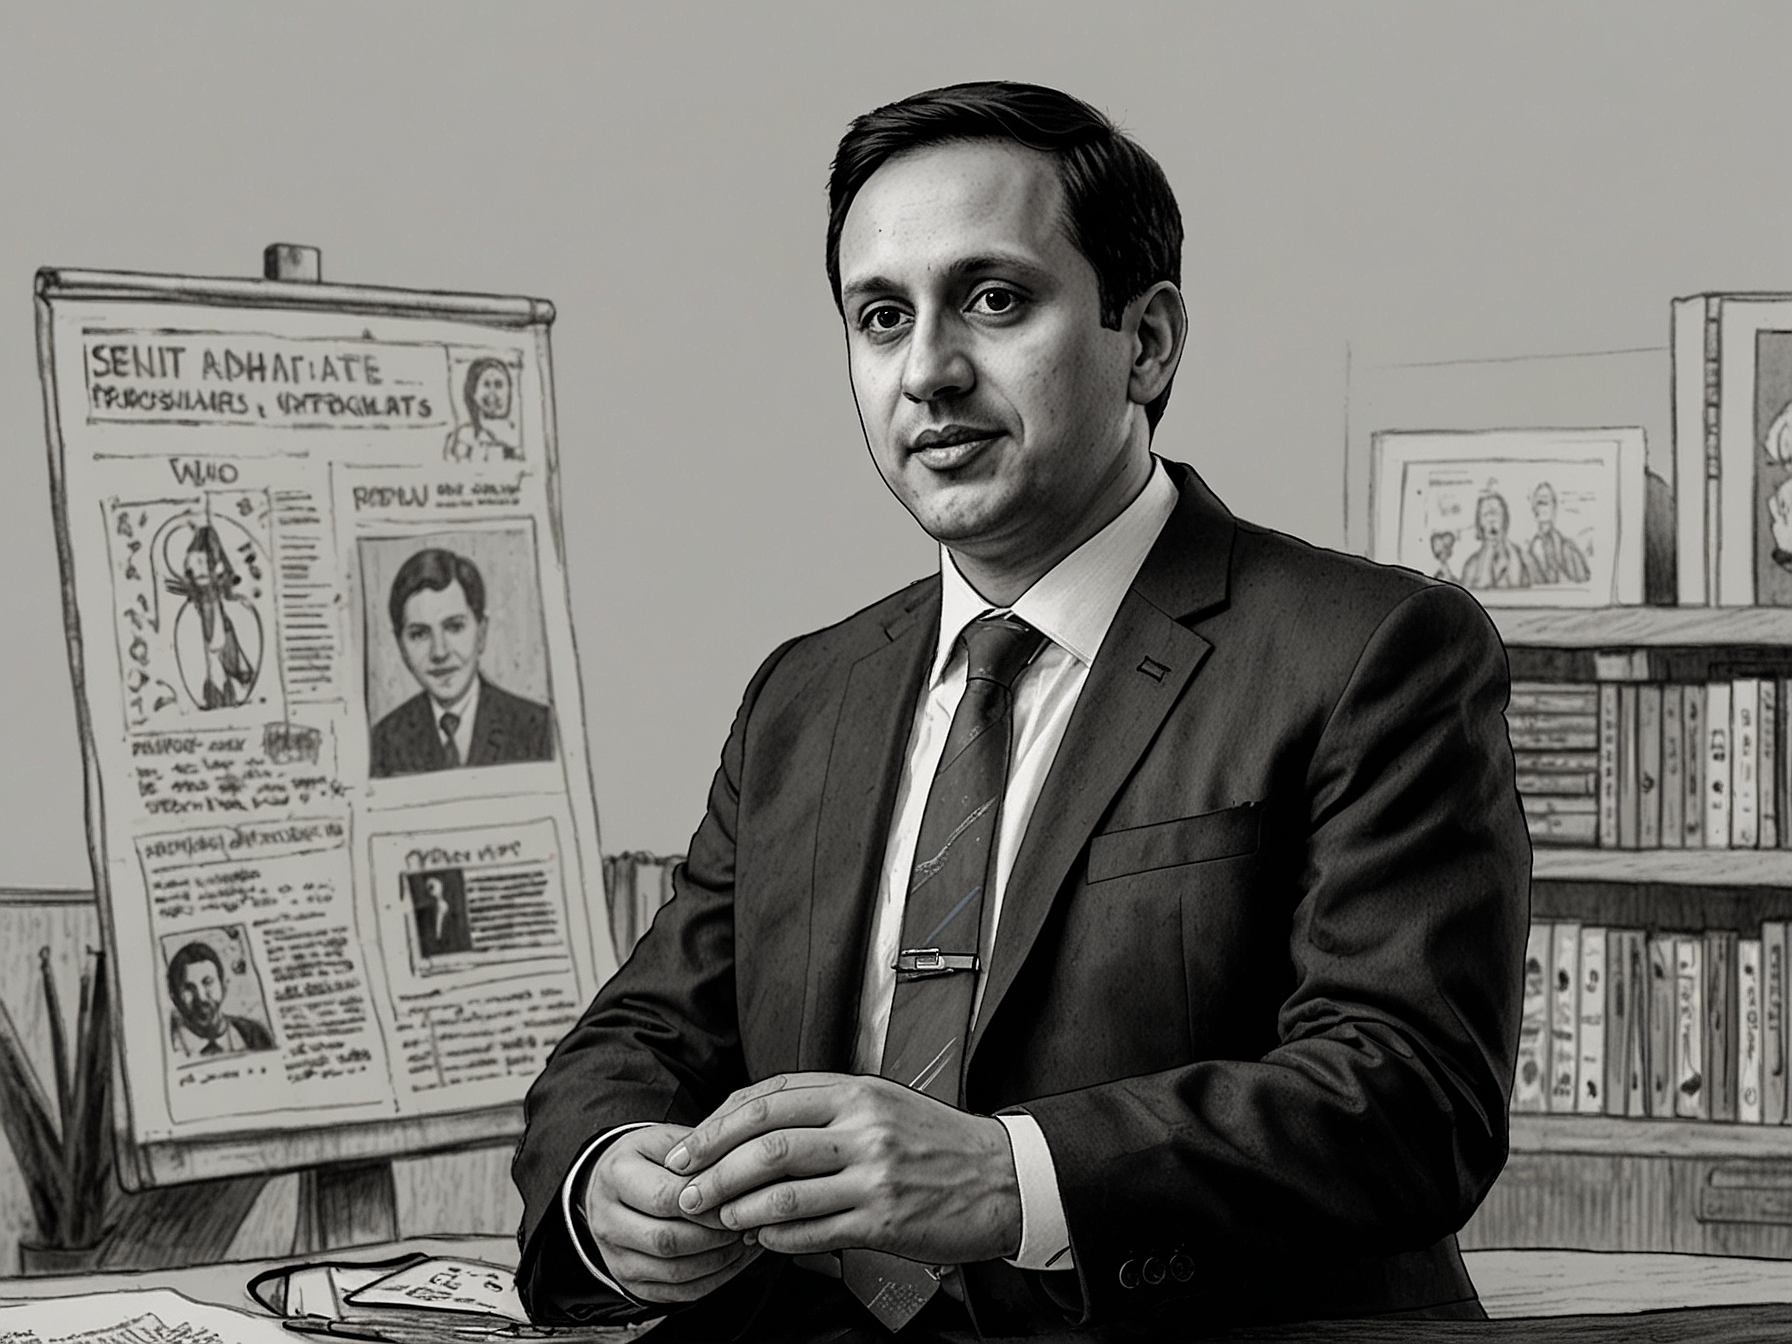 Anas Sarwar presenting the Scottish Labour manifesto, emphasizing policies on healthcare, education, and the economy, aimed at transforming Scotland's political landscape.